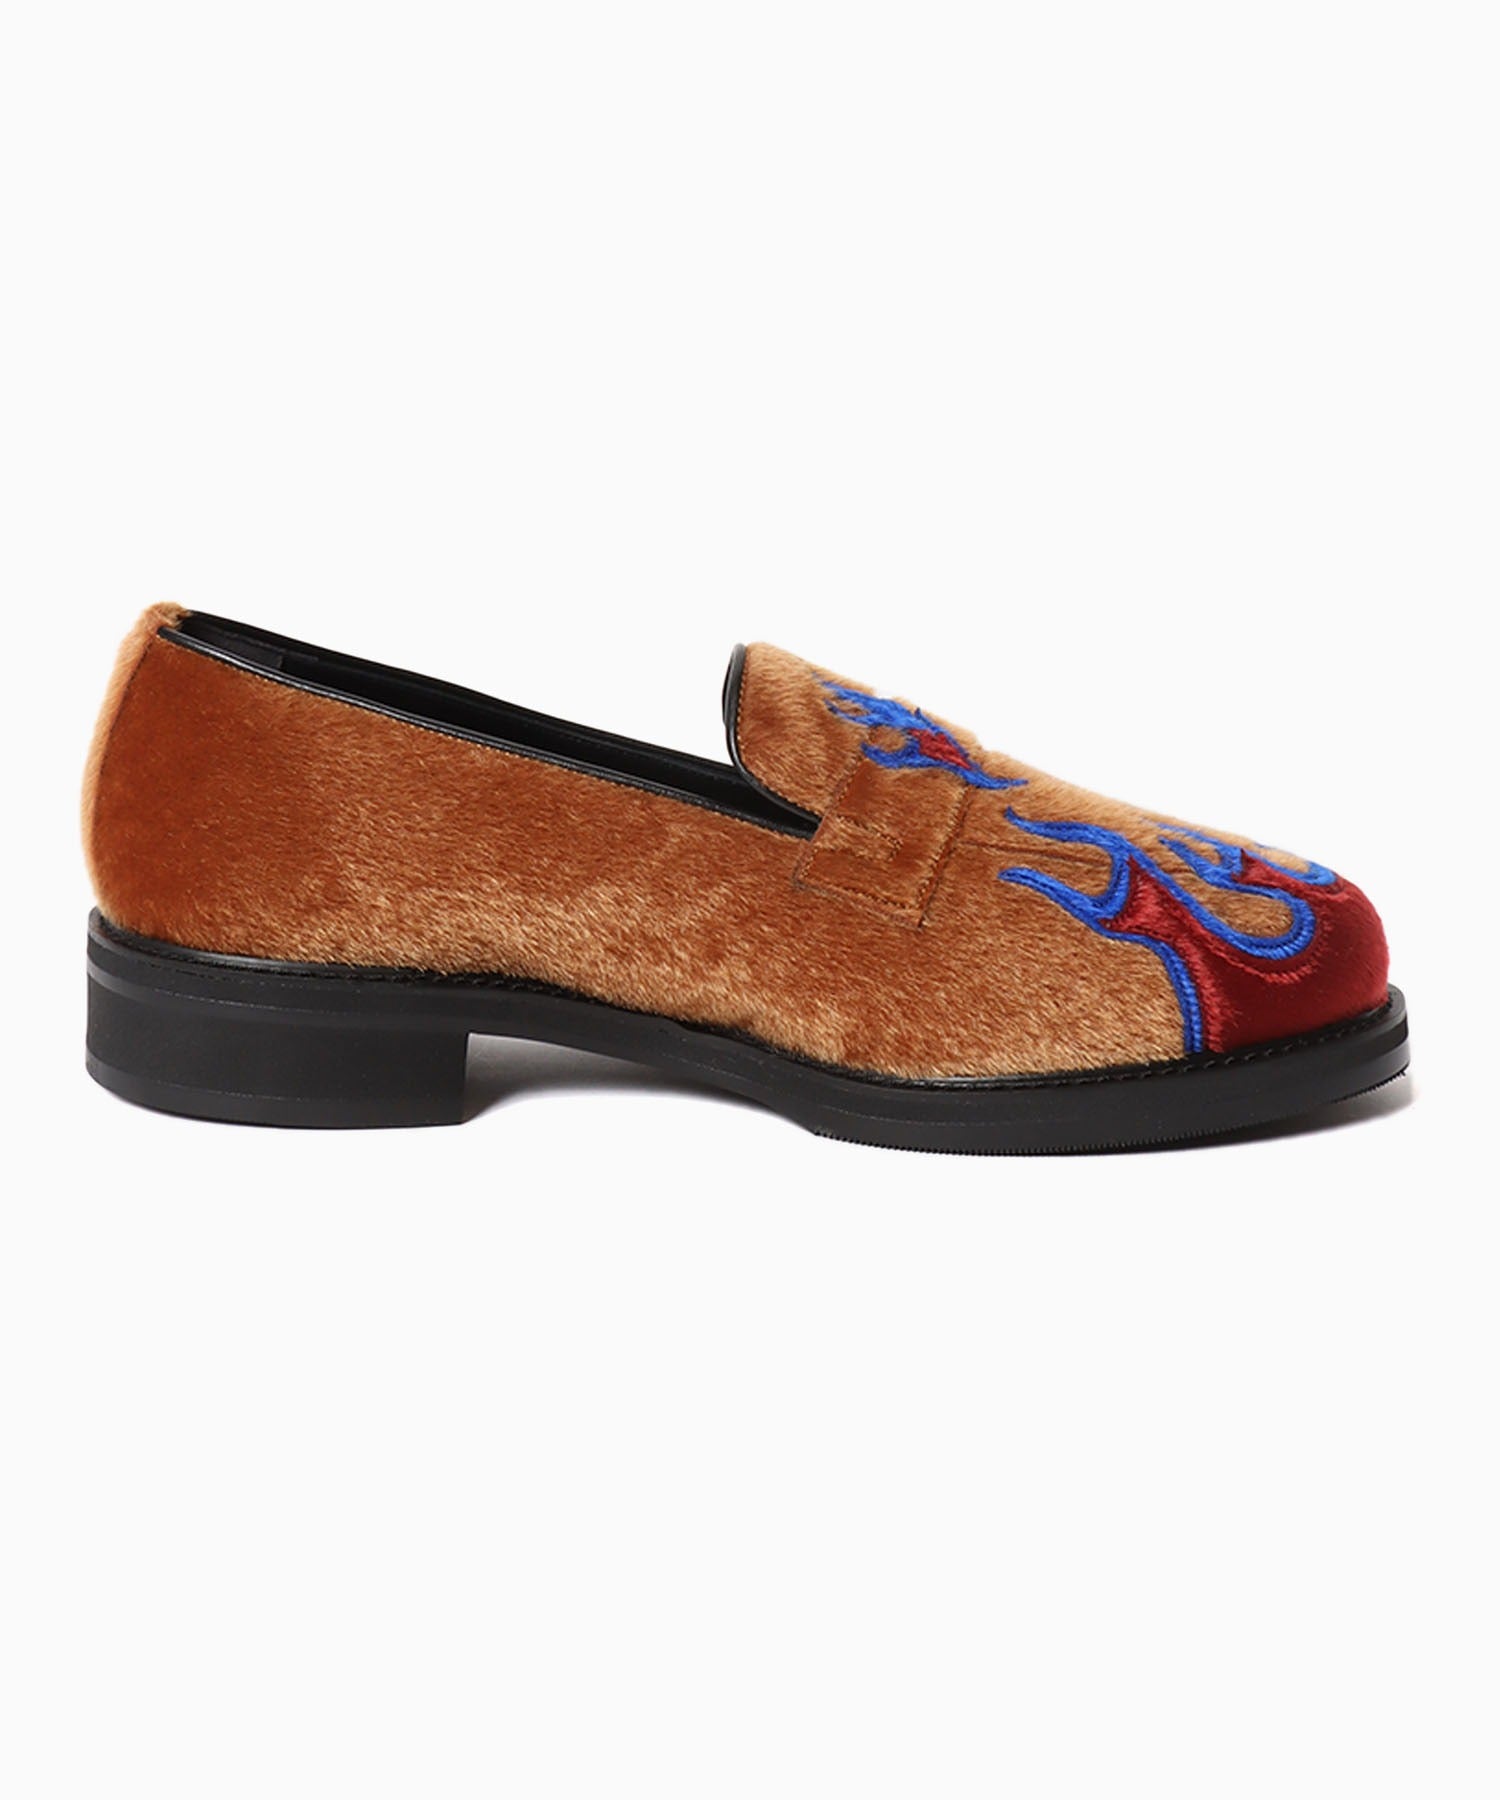 FLAME PATTERN LOAFER